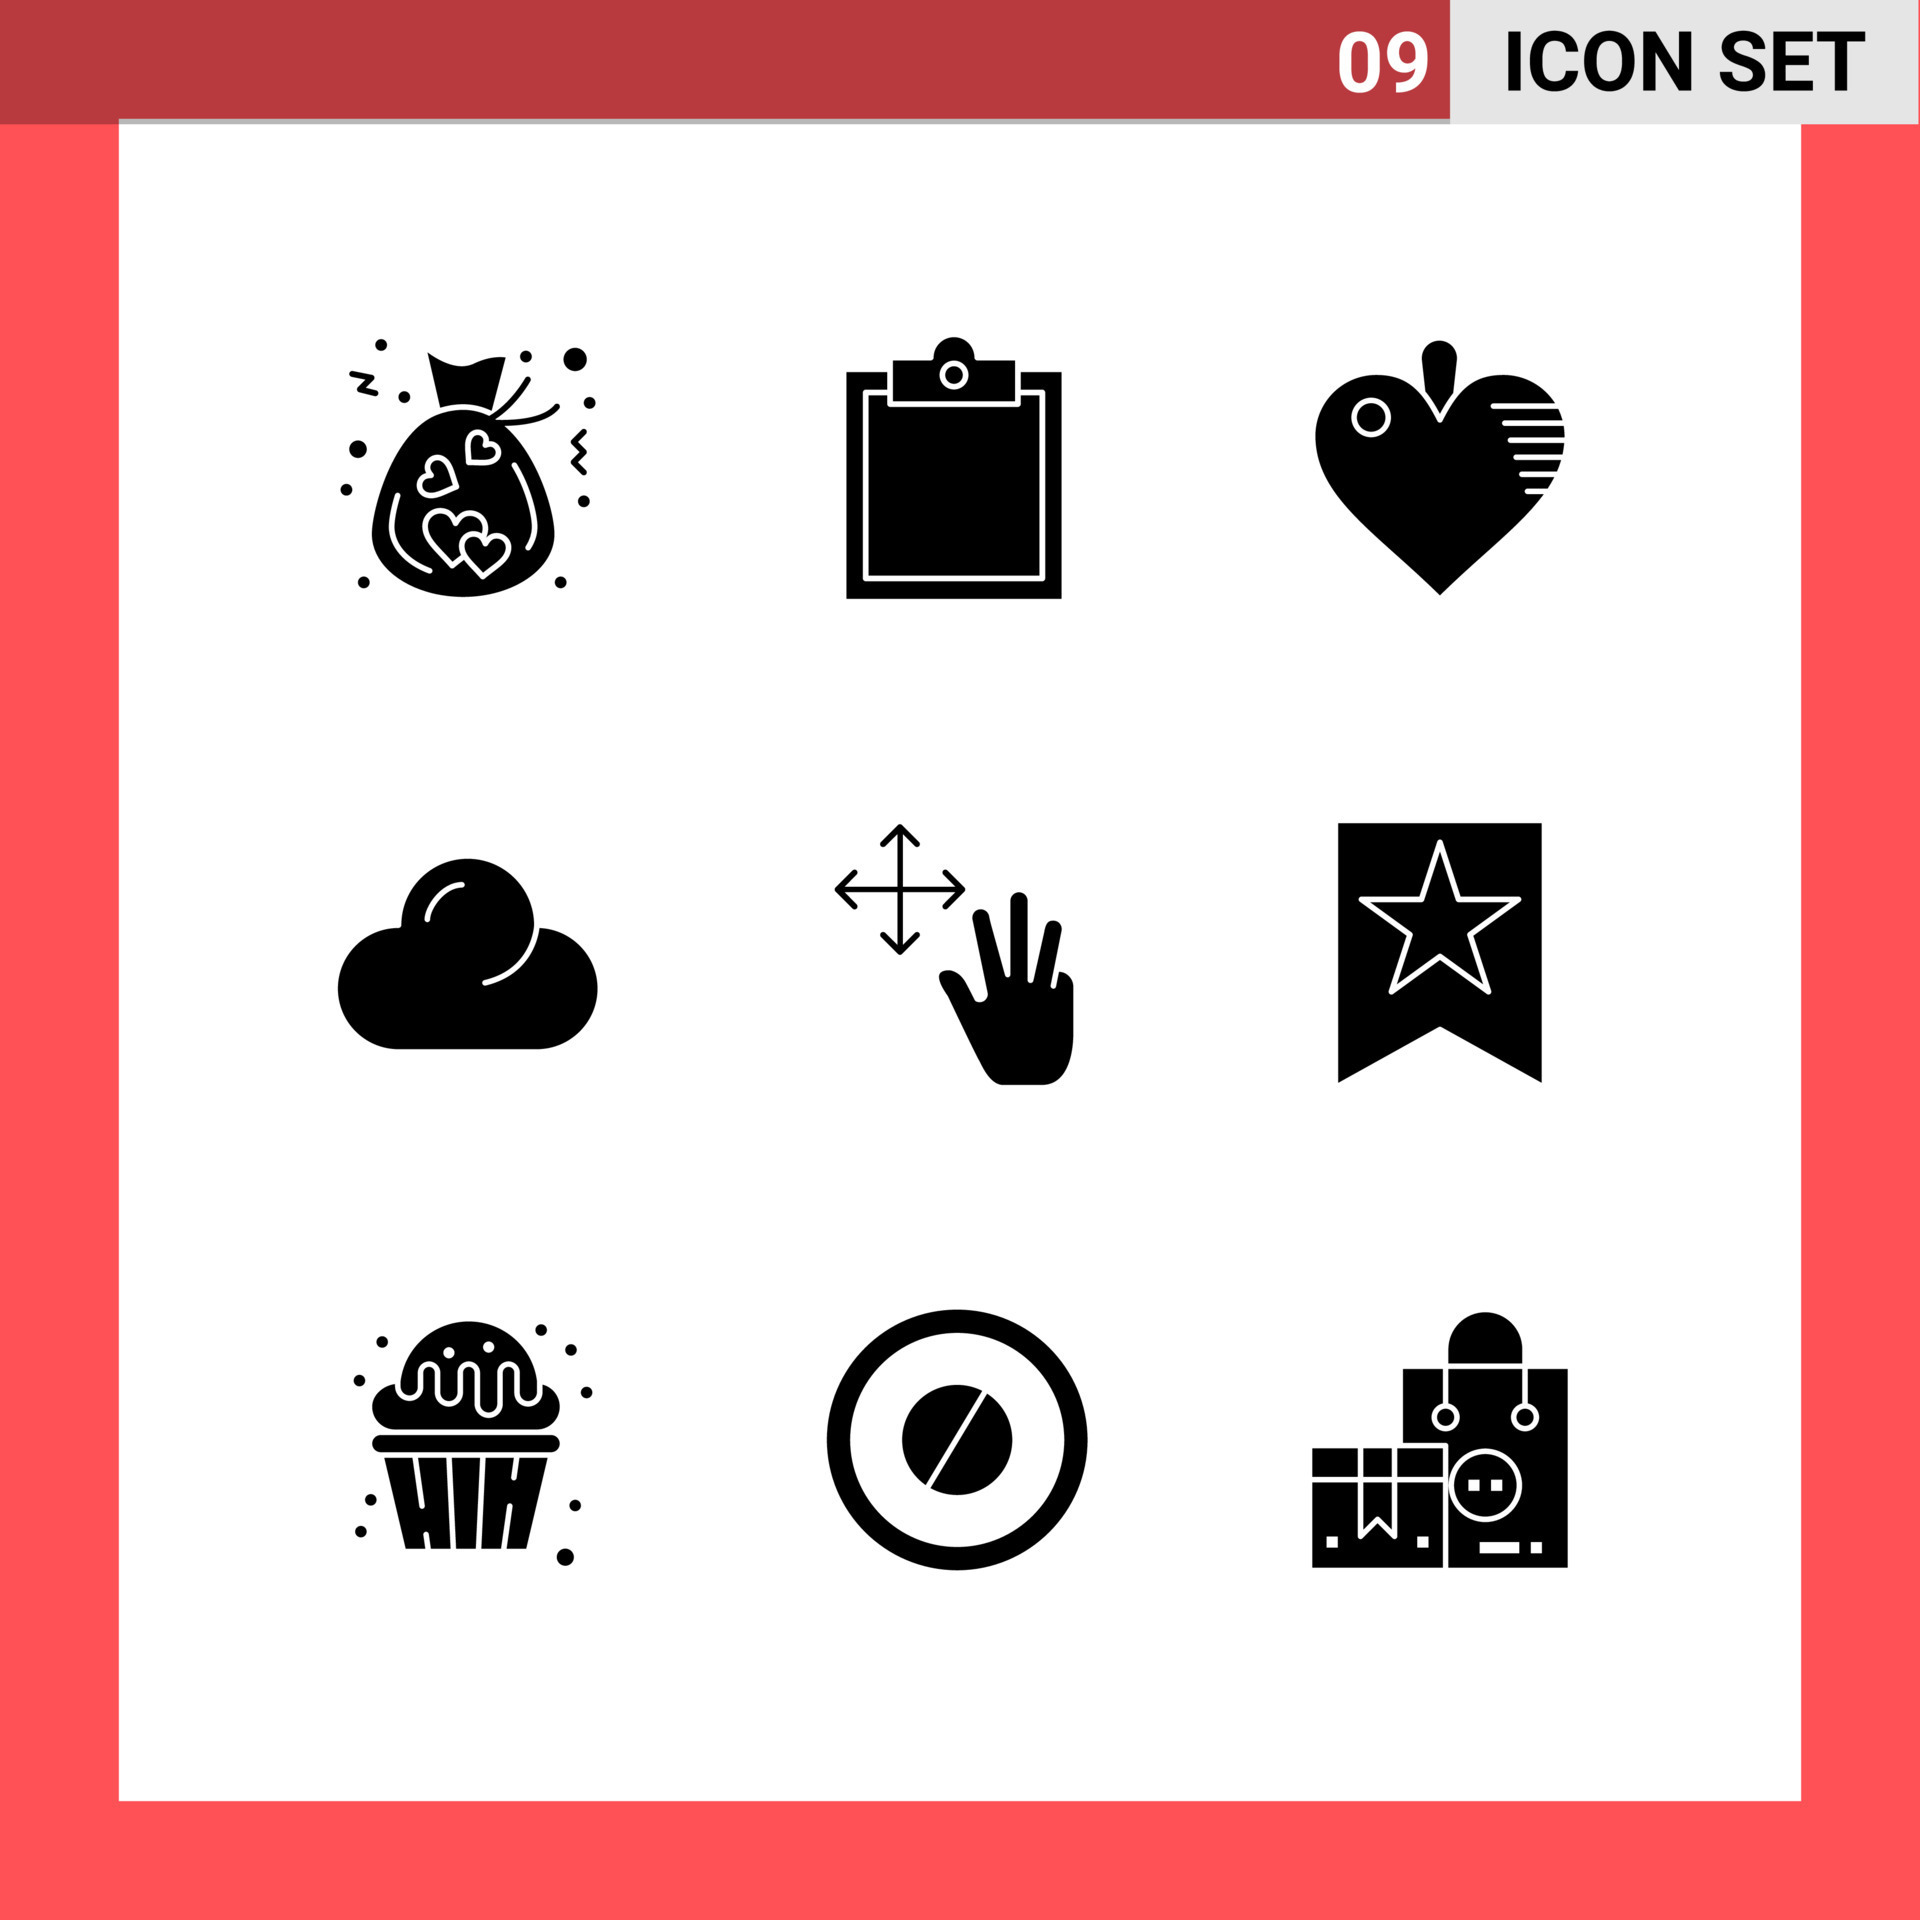 Four squares - User Interface & Gesture Icons